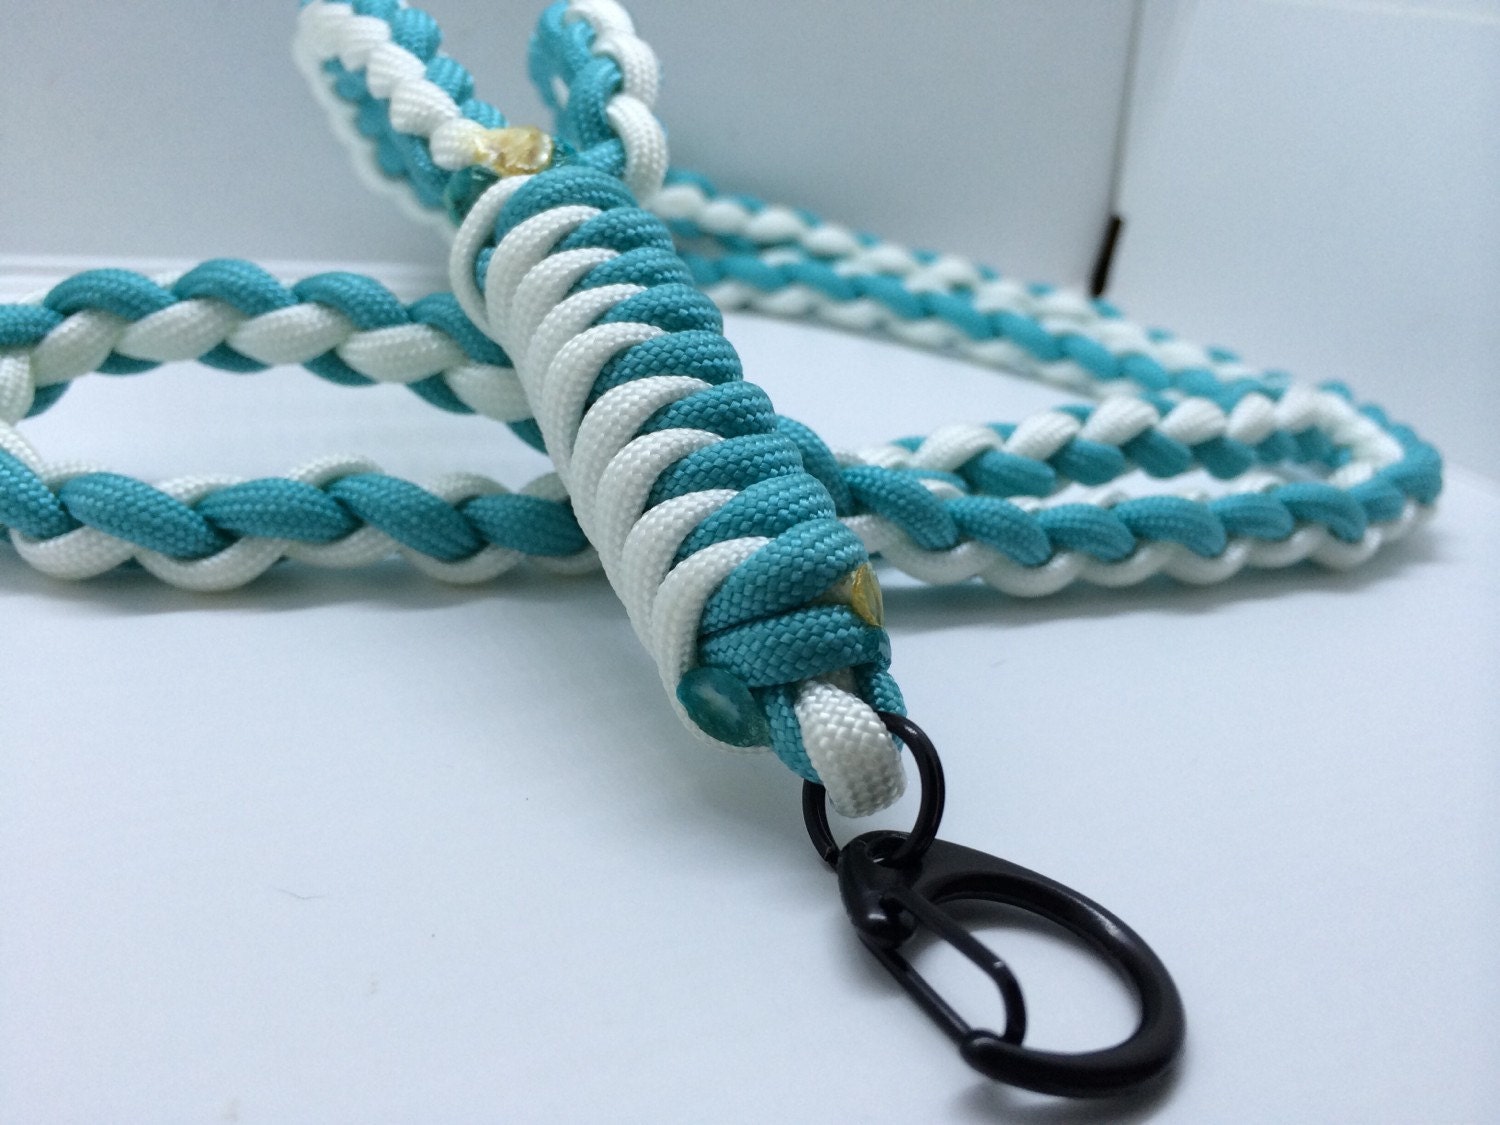 Four Strand Round Braid Paracord Lanyard by BlindKnotsParacord